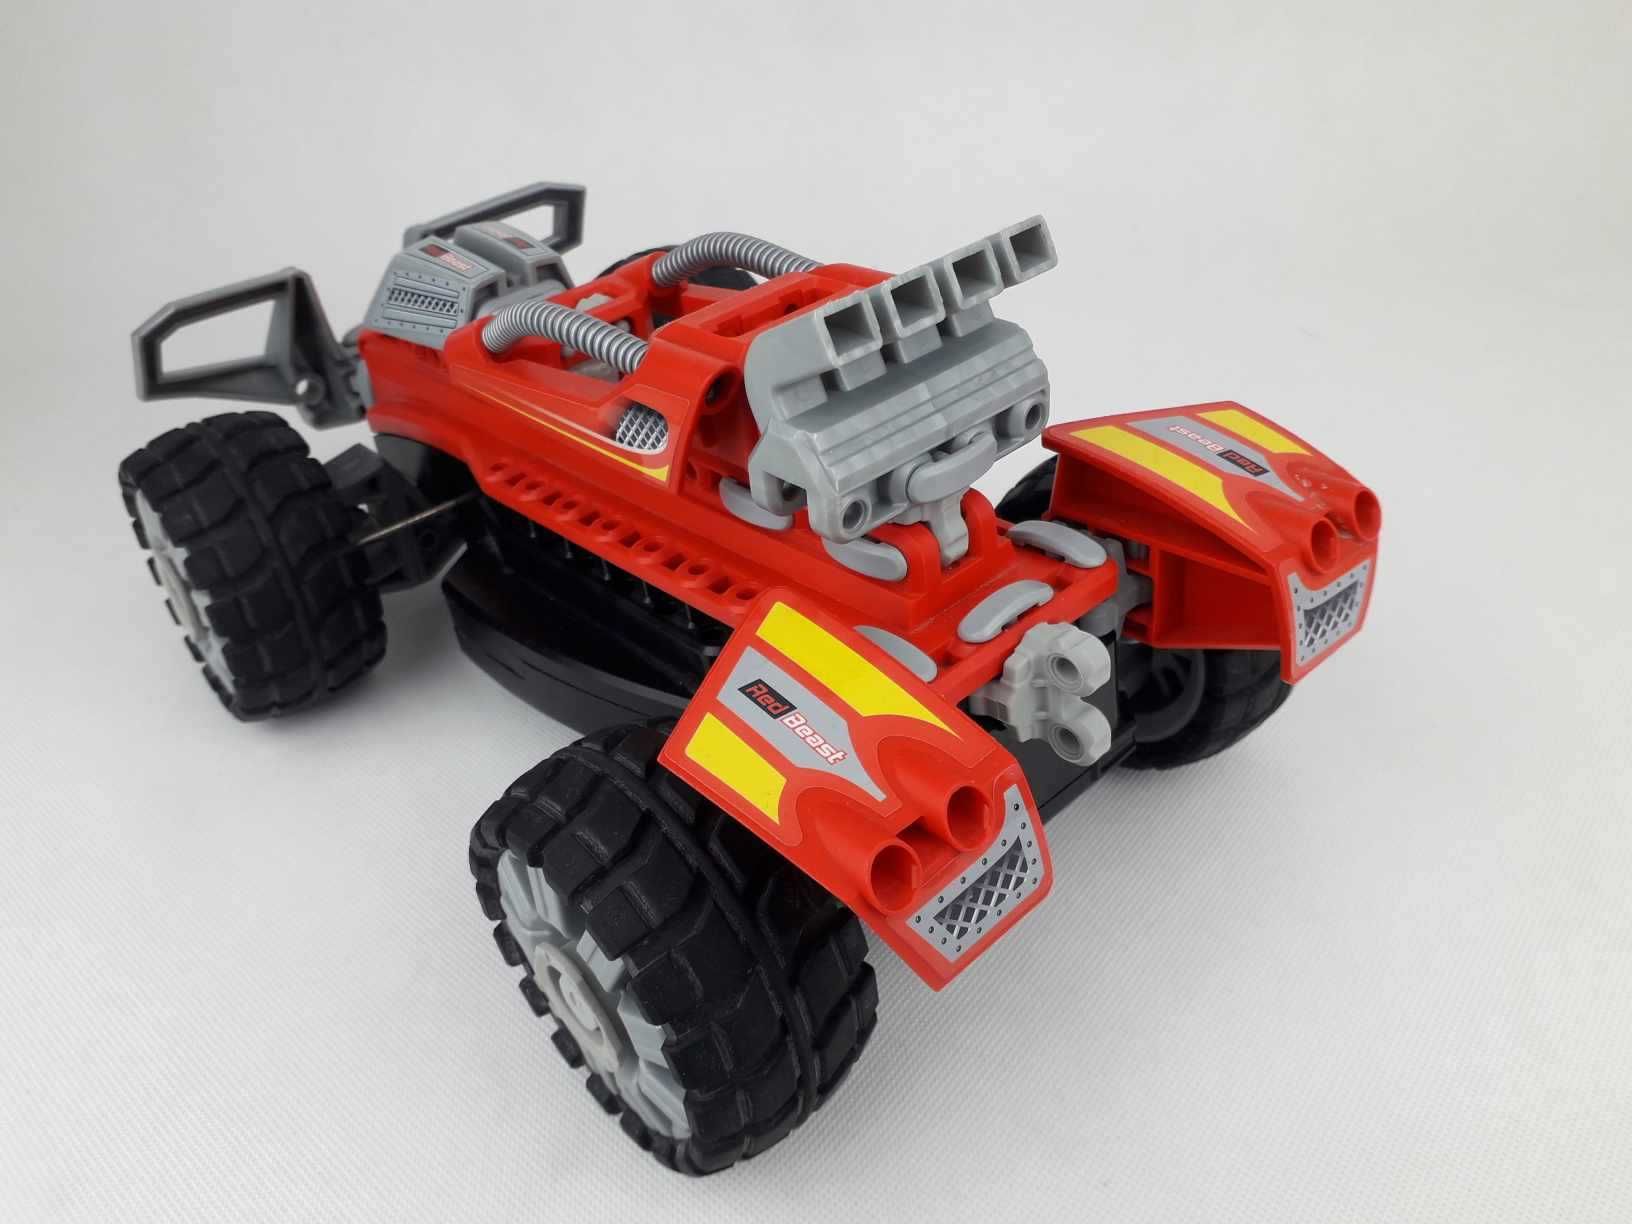 LEGO Technic Racers 8378 Red Beast RC